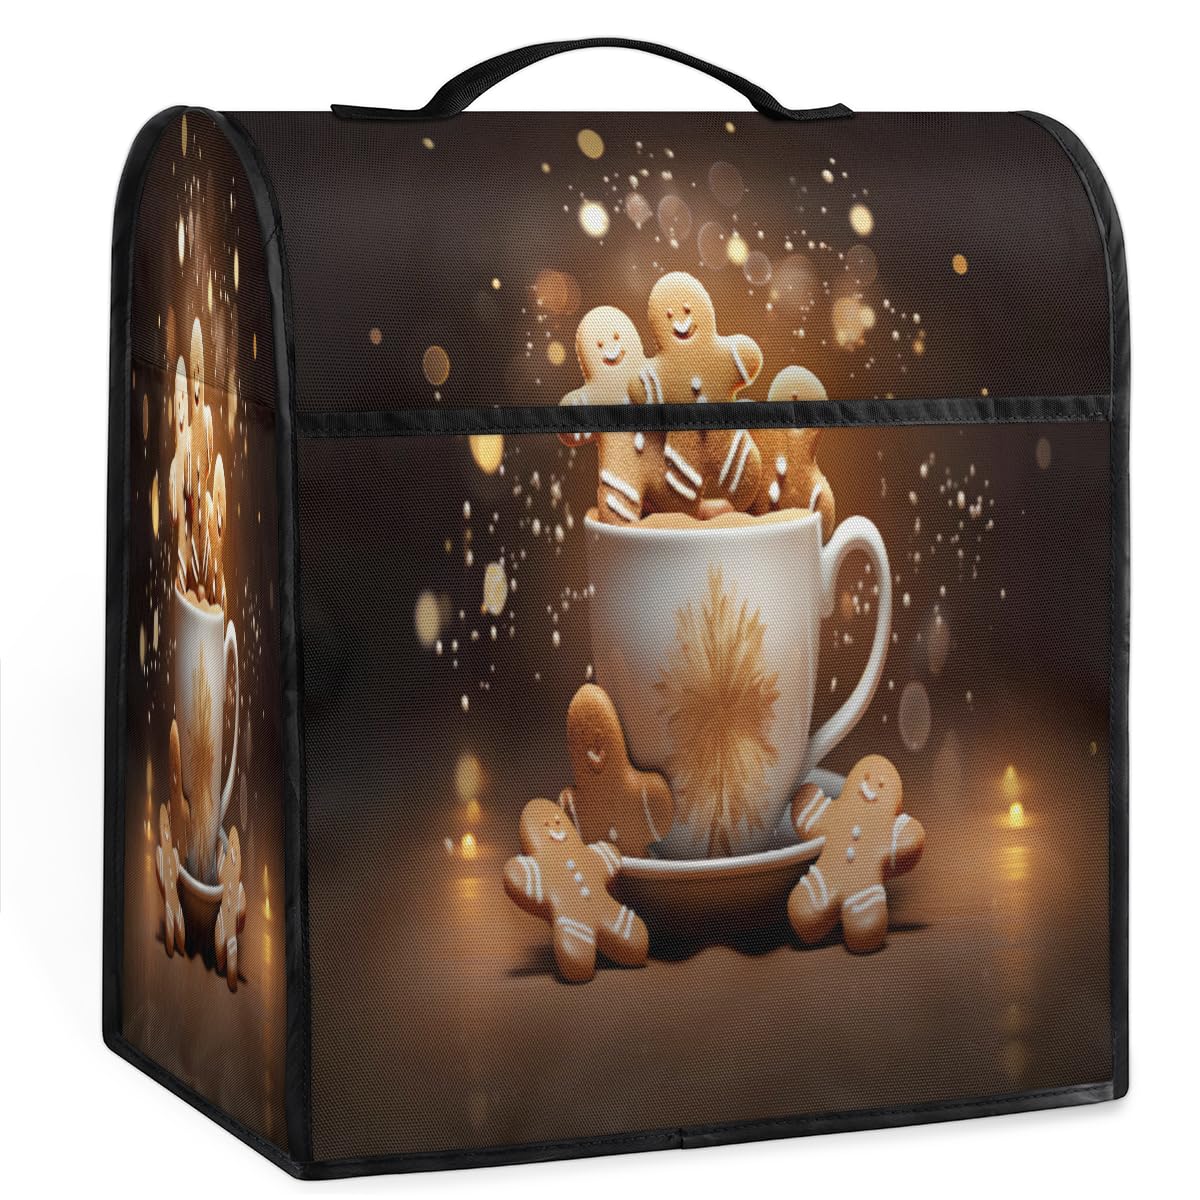 Christmas Cup With Gingerbread Men (5) Coffee Maker Dust Cover Mixer Cover with Pockets and Top Handle Toaster Covers Bread Machine Covers for Kitchen Cafe Bar Home Decor